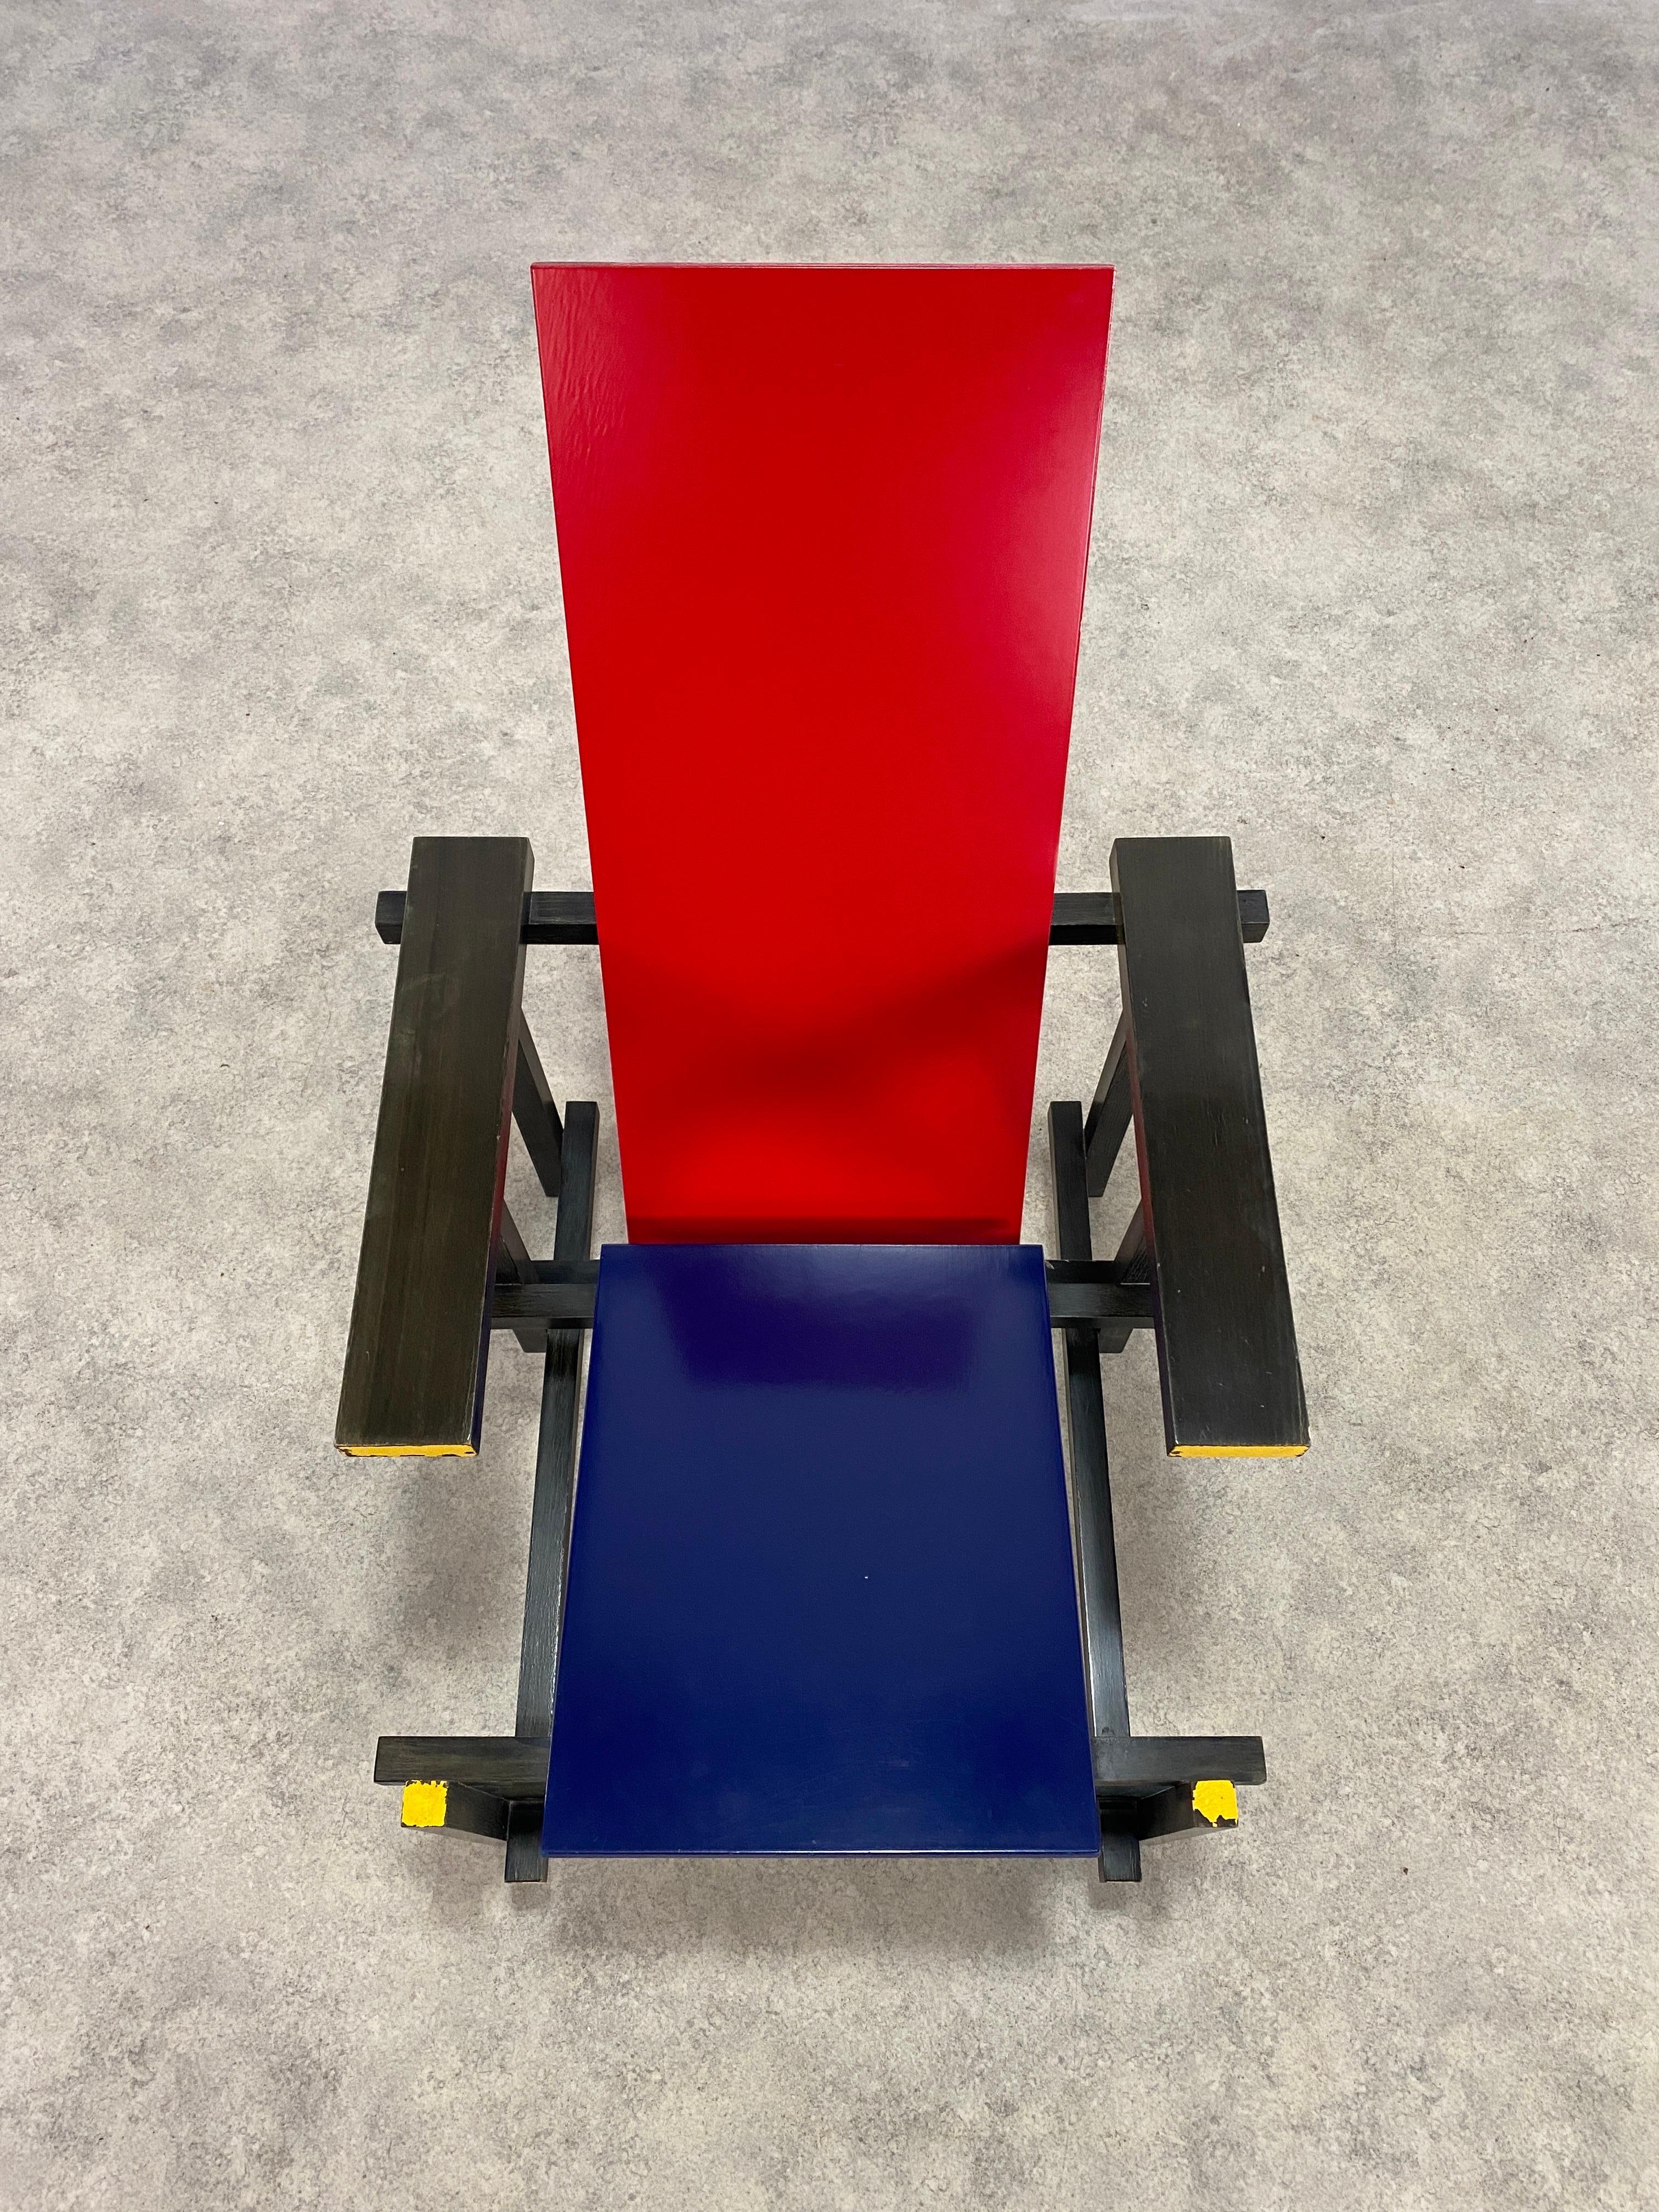 Red Blue Chair by Gerrit Rietveld for Cassina No. 213 2